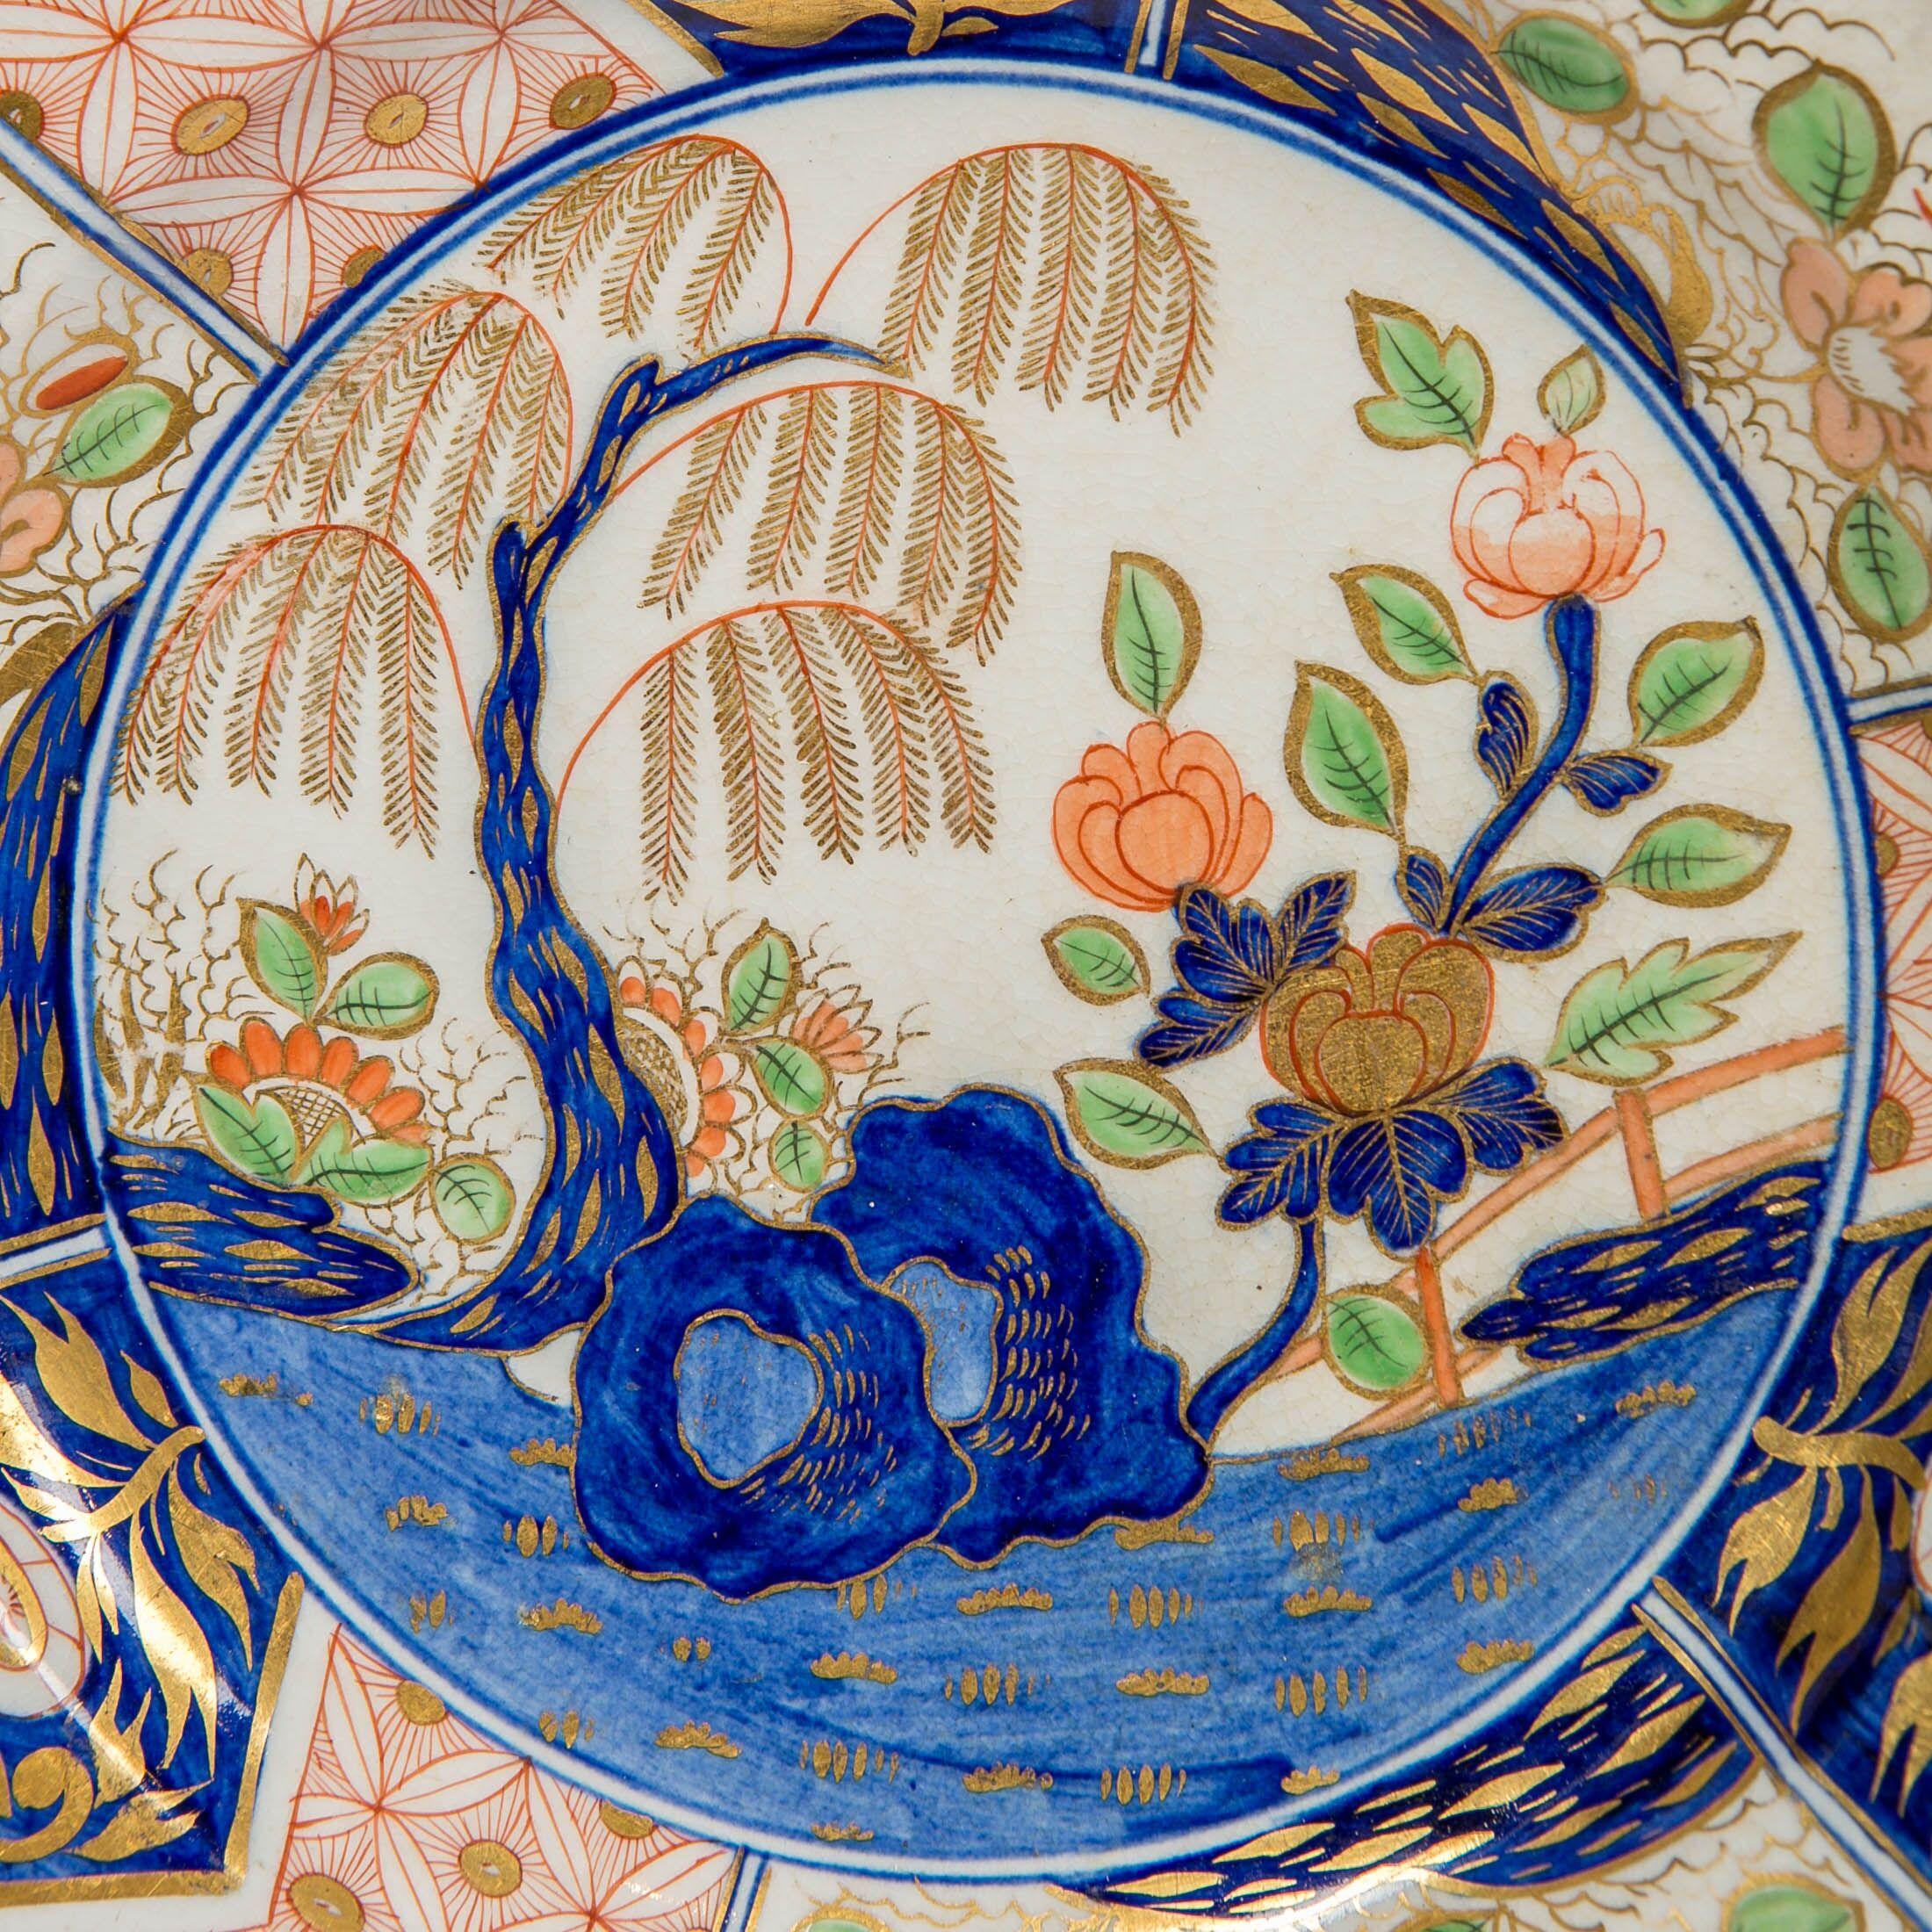 English Set of Rock and Tree Pattern Dinner Plates Made in England, circa 1820